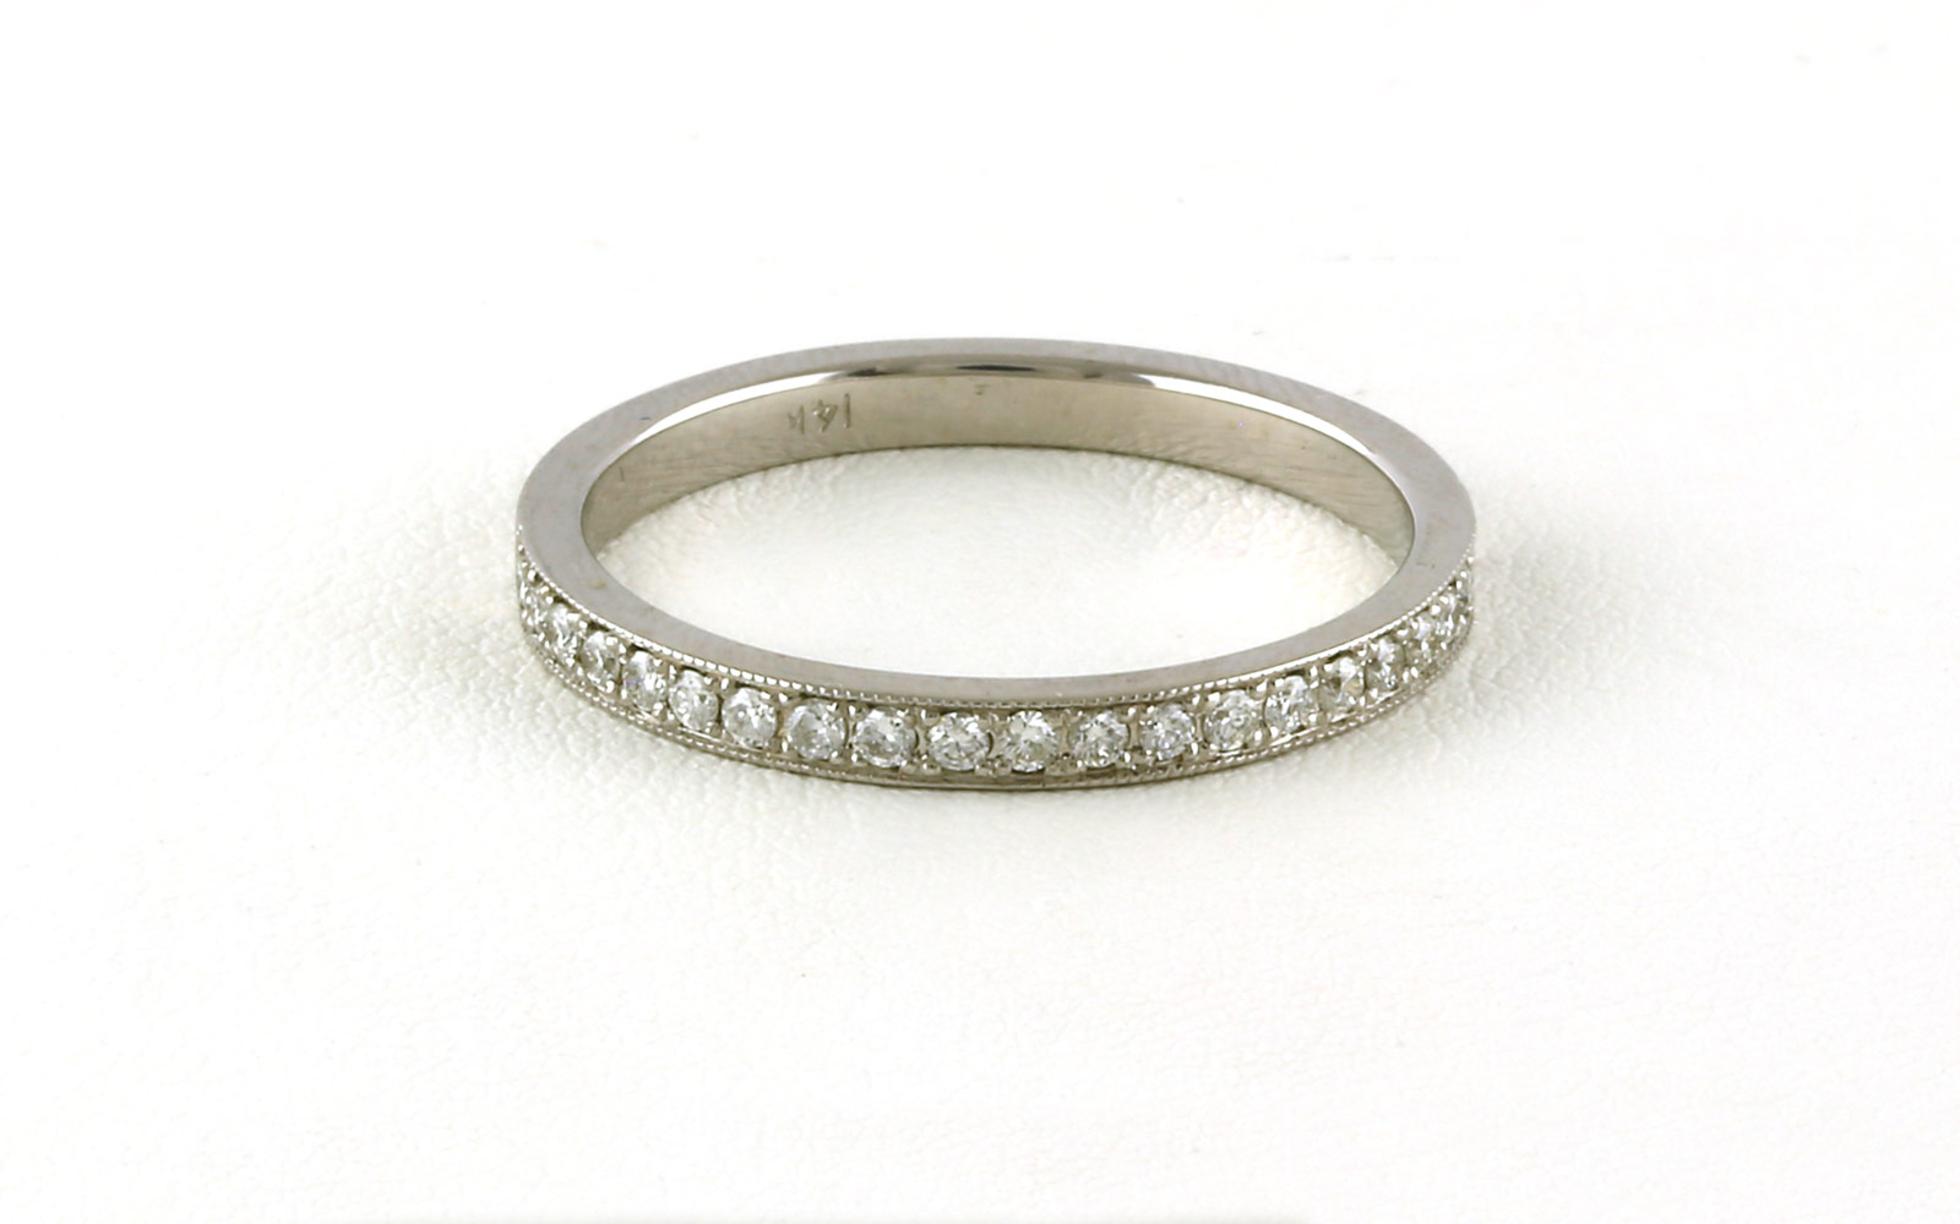 Pave-set Diamond Wedding Band with Milgrain Detail in White Gold (0.20cts TWT)